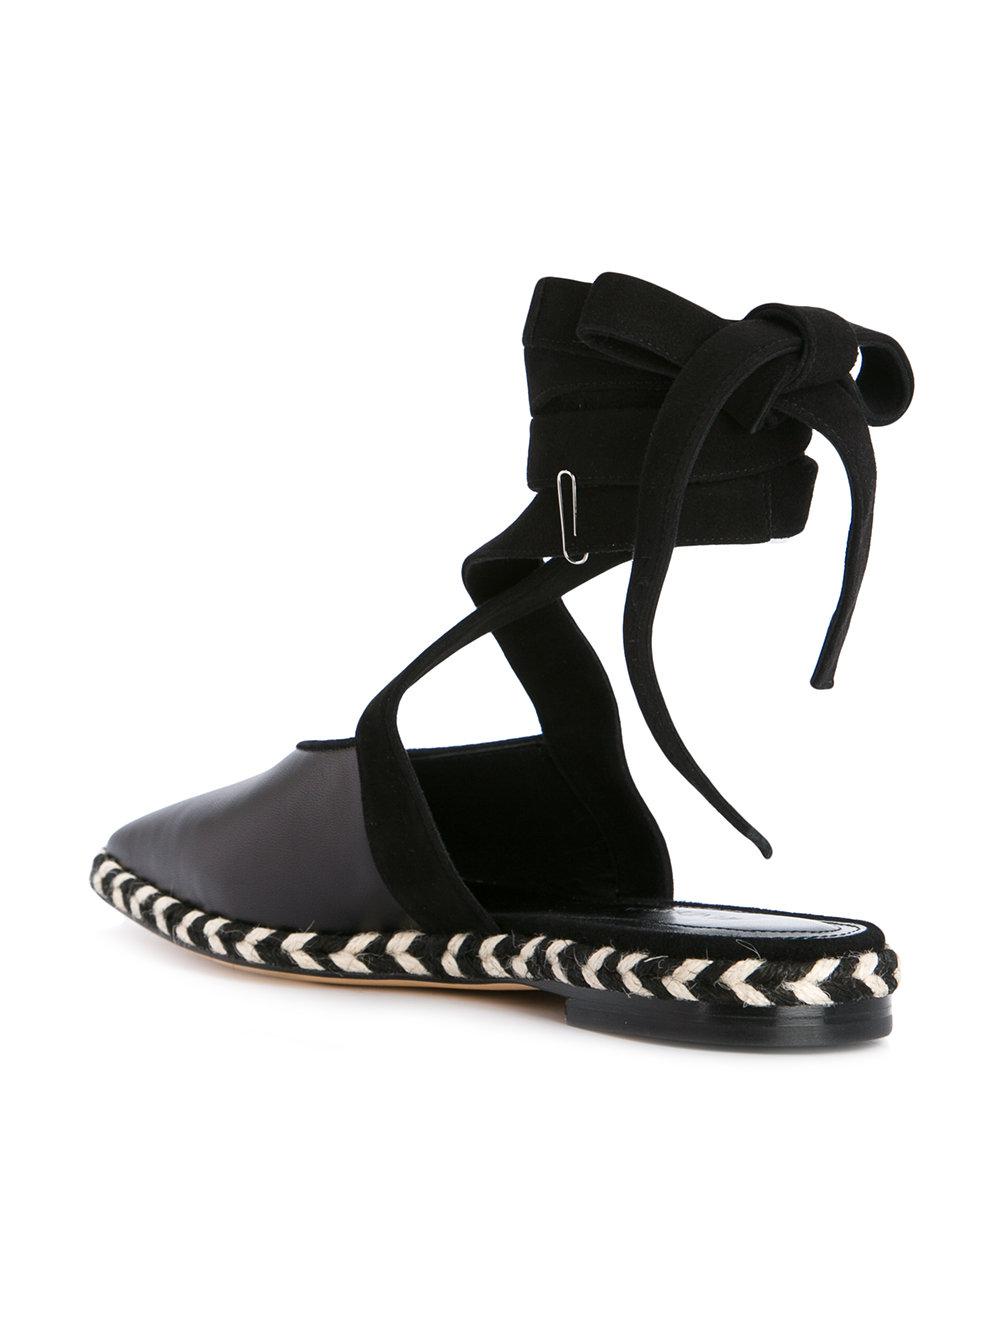 JW Anderson Leather Wrap Around Mules in Black - Lyst